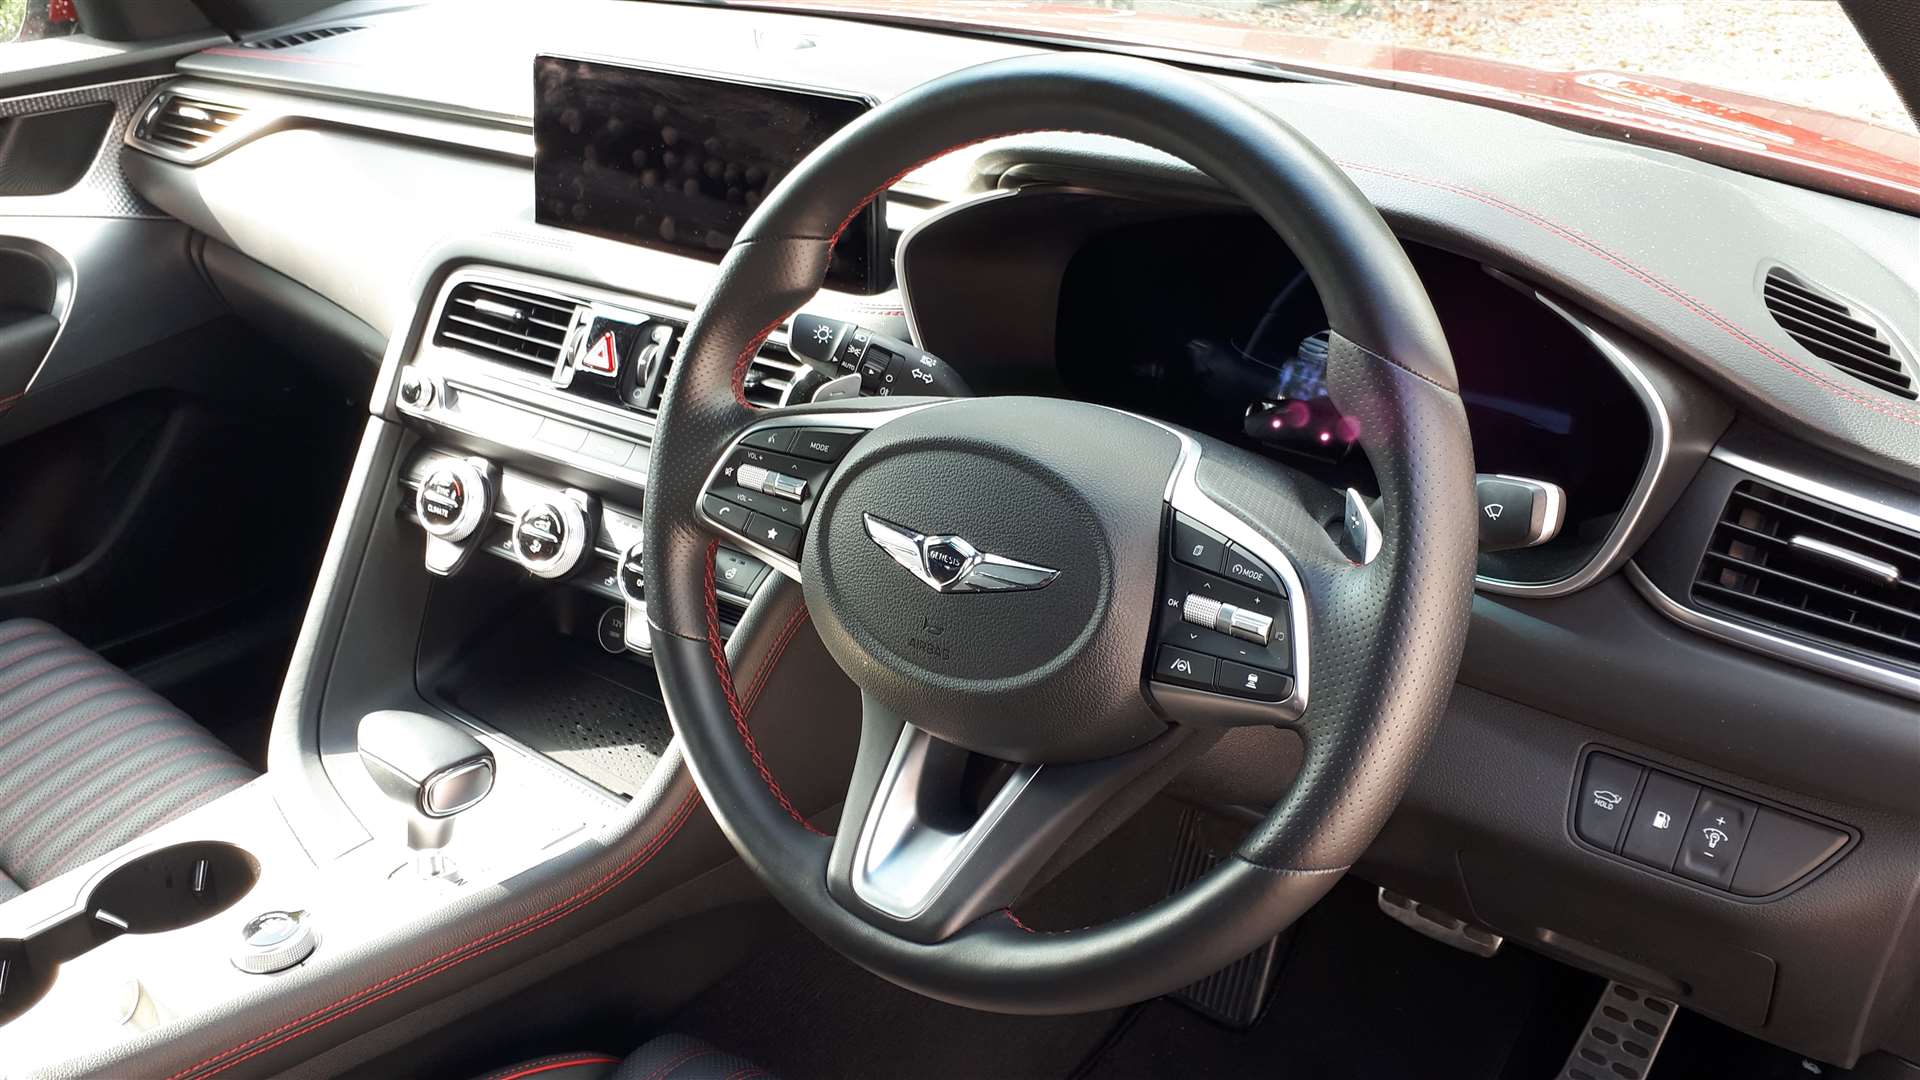 The interior of the Genesis G70.